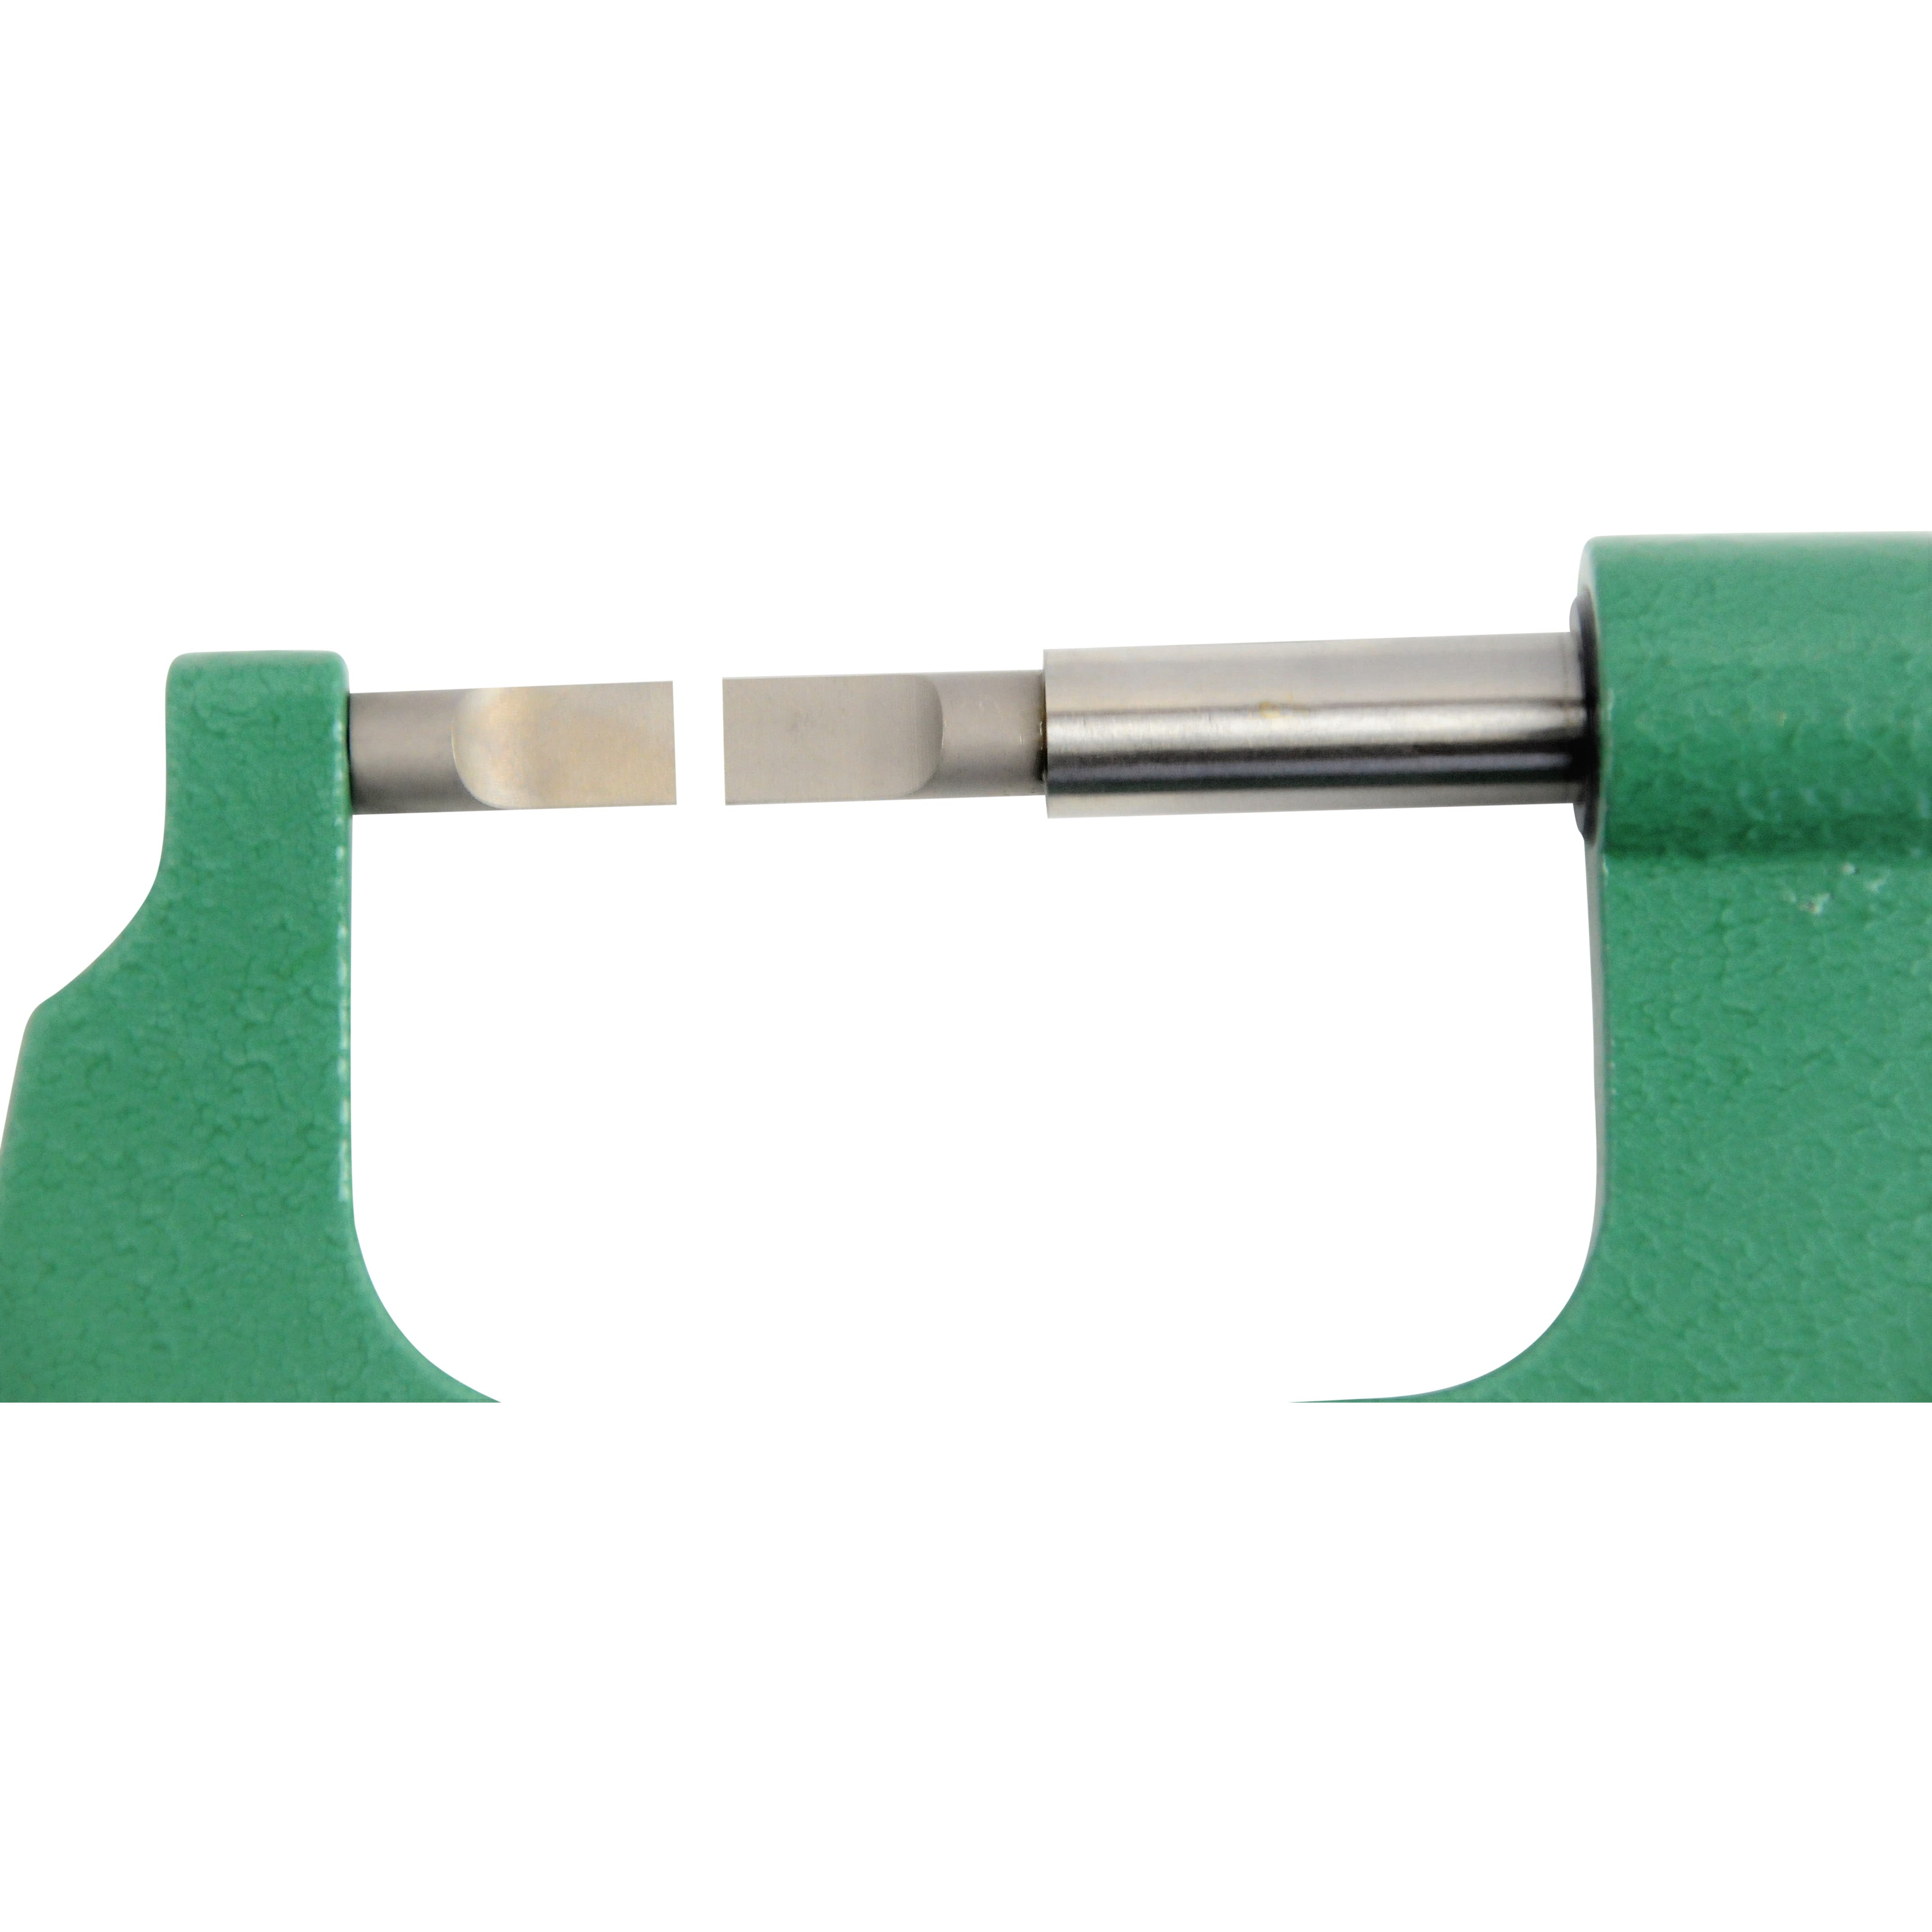 Insize Imperial Outside Blade Micrometer 0-1" Range Series 3232-1